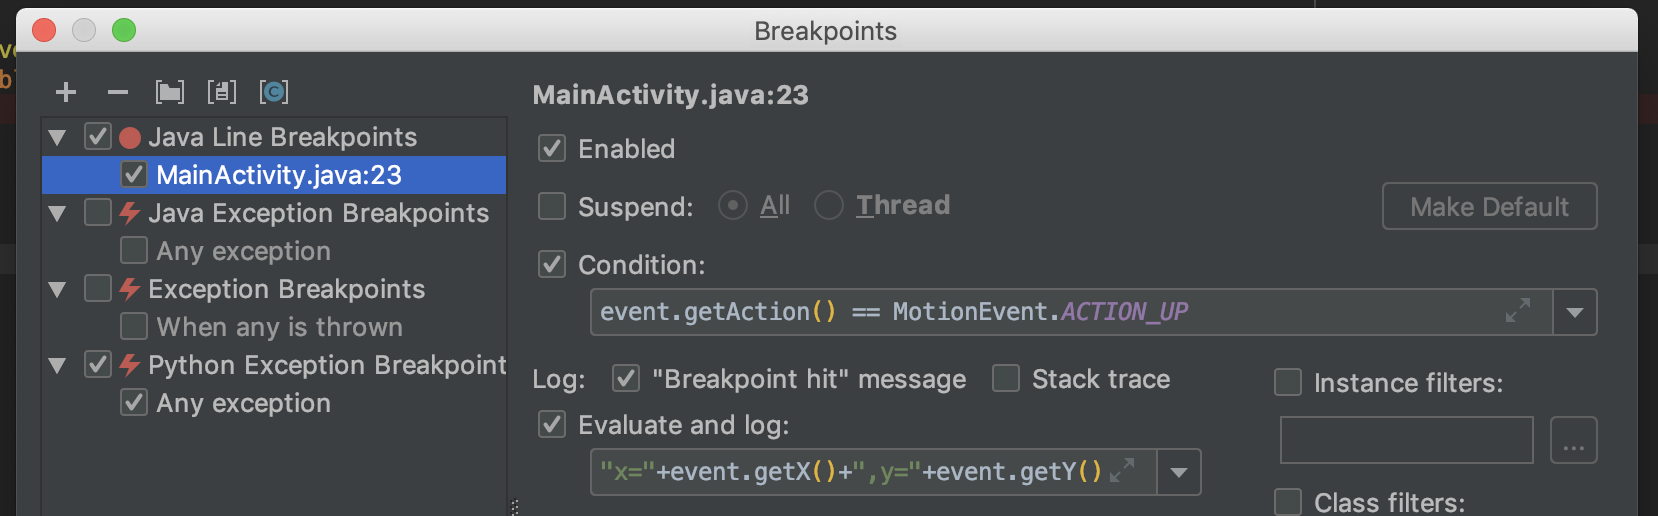 breakpoint options